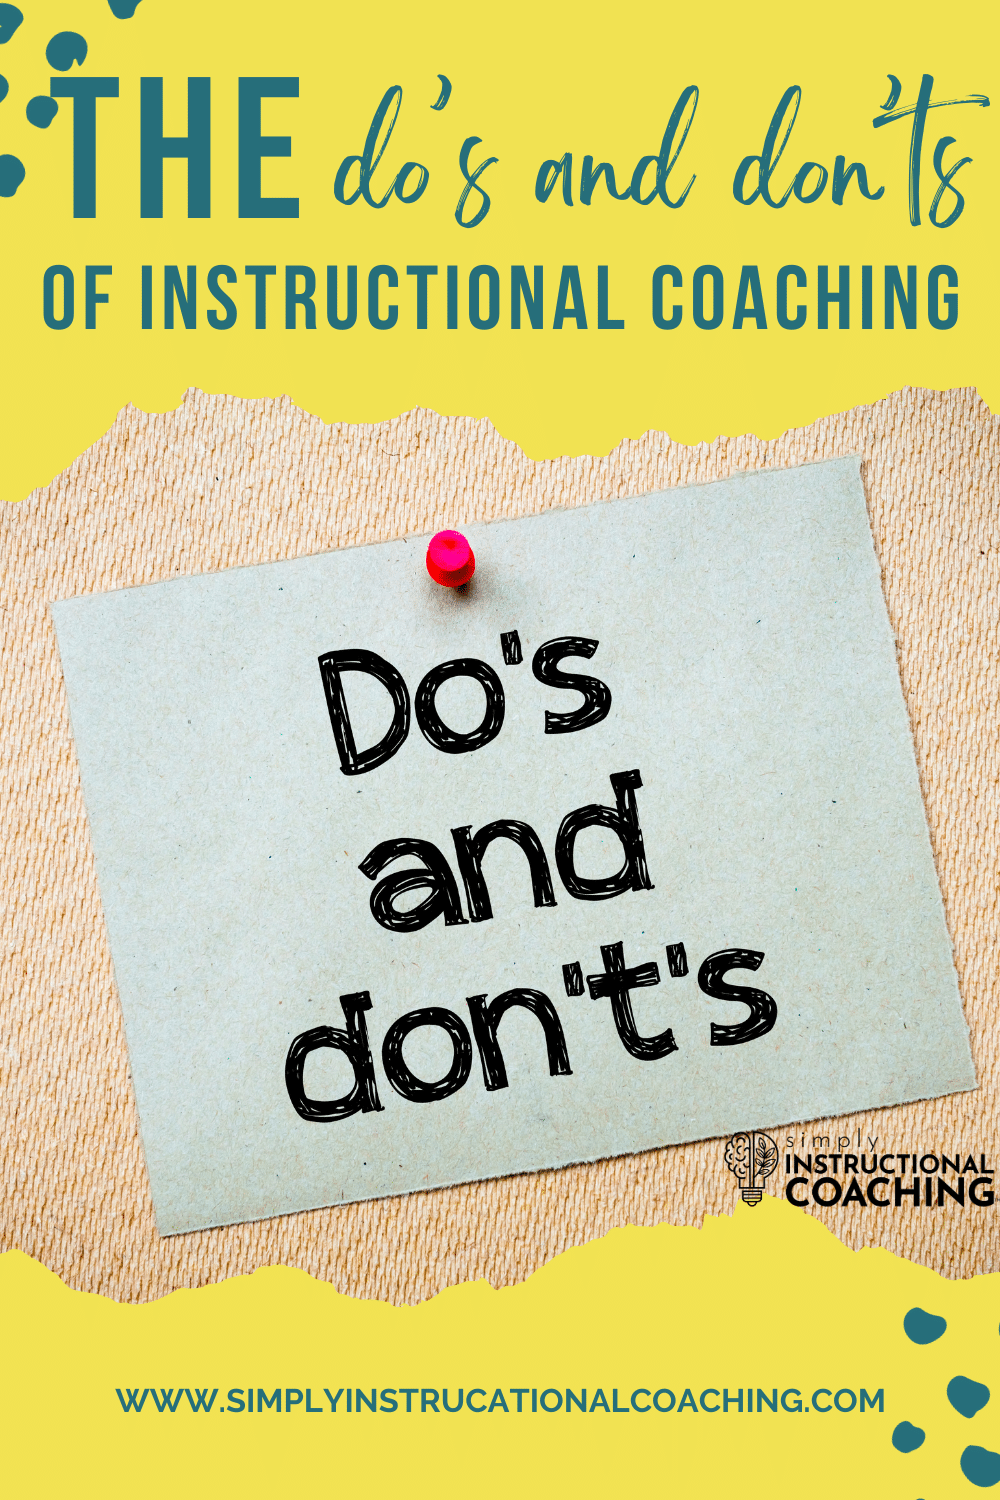 the do's and don'ts of instructional coaching